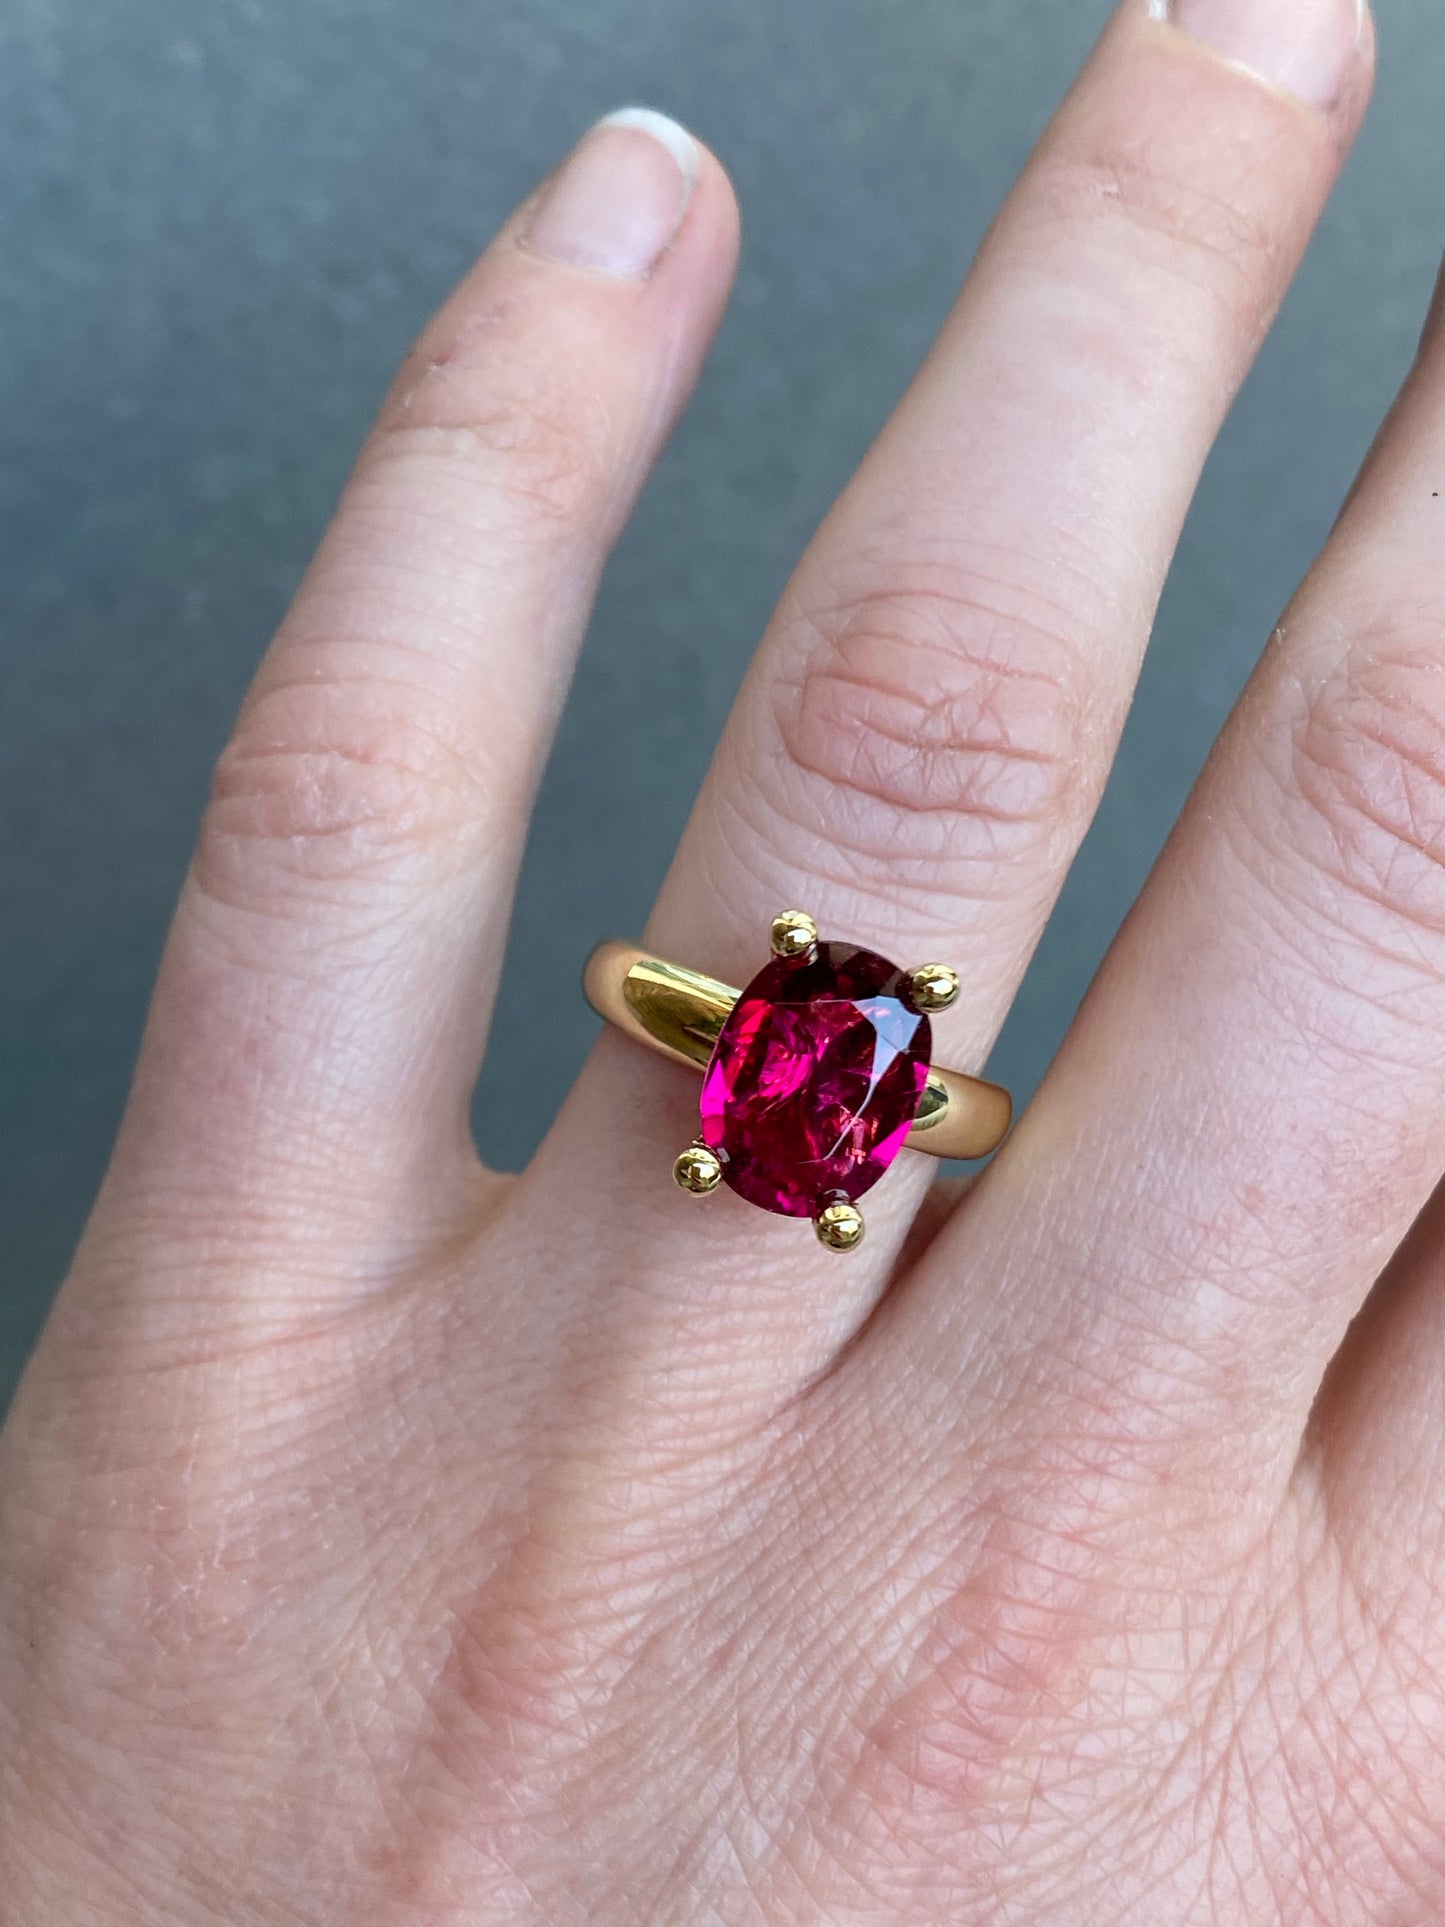 #2 Collector’s ring with rubellite tourmaline 18k